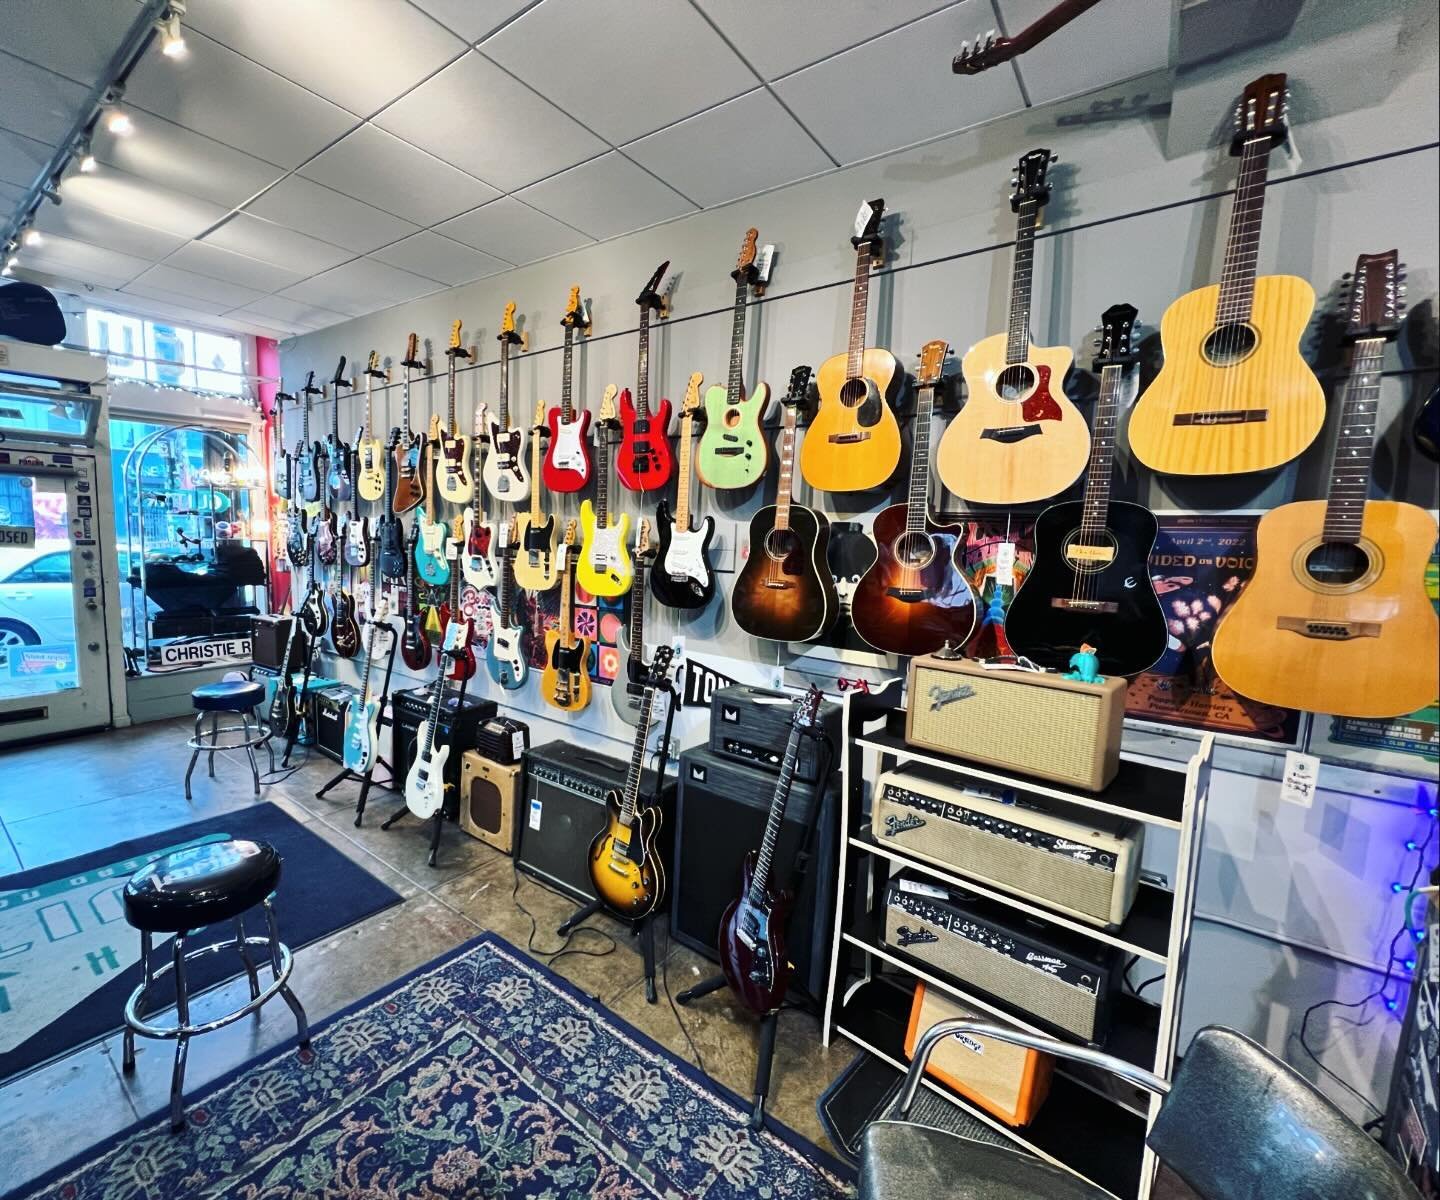 The Wall is calling to you, will you answer? Come play! #oaklandguitars